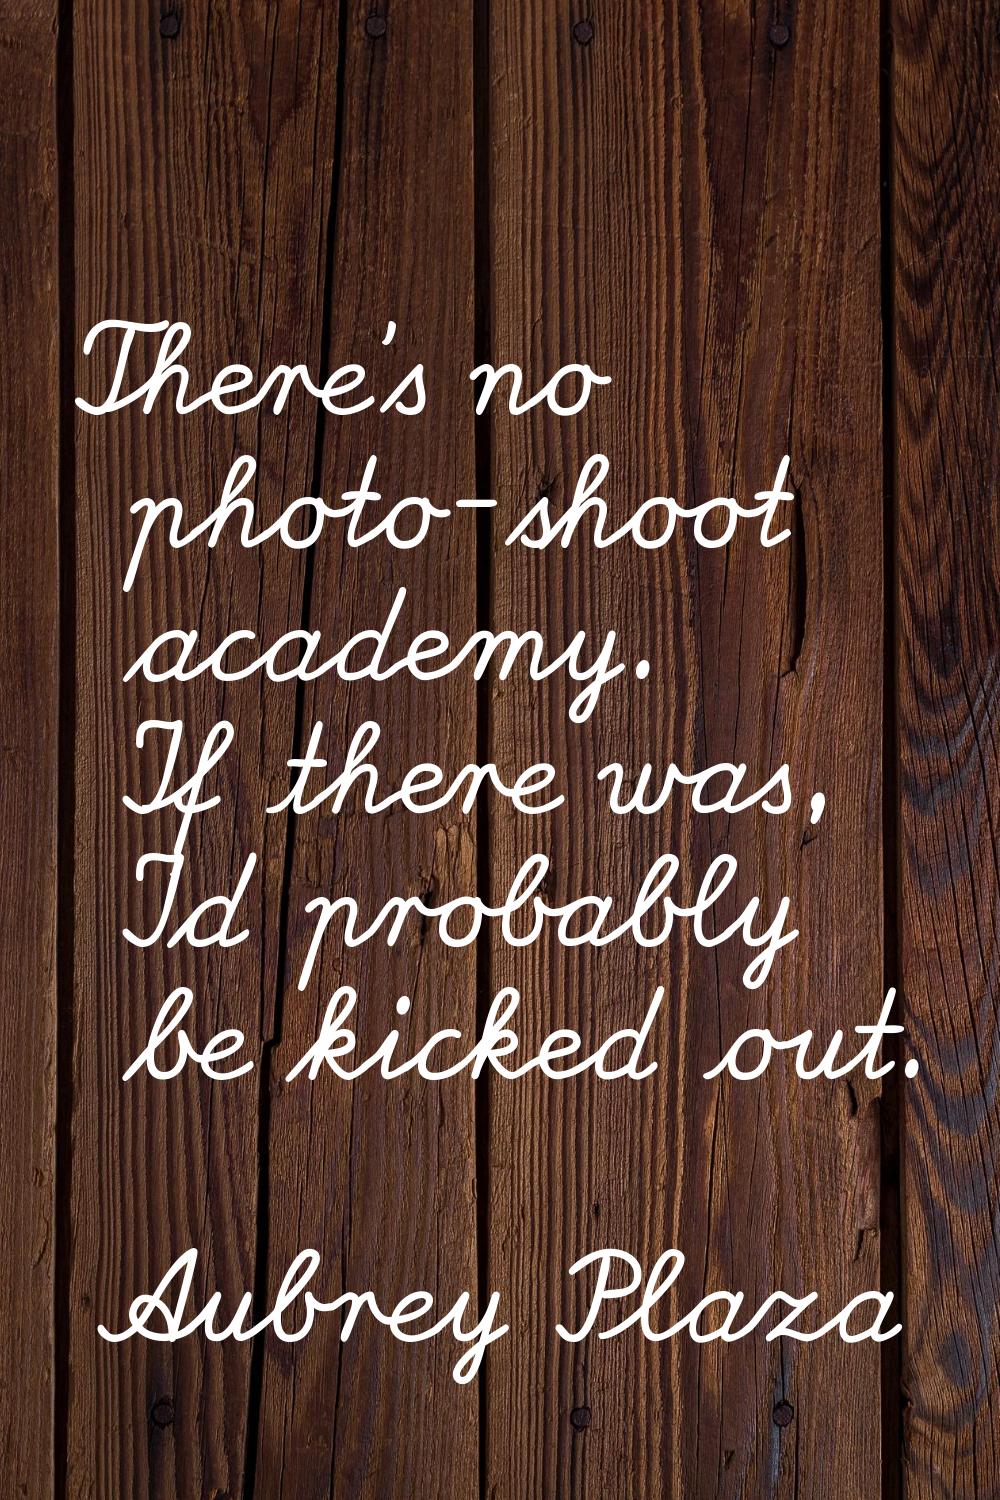 There's no photo-shoot academy. If there was, I'd probably be kicked out.